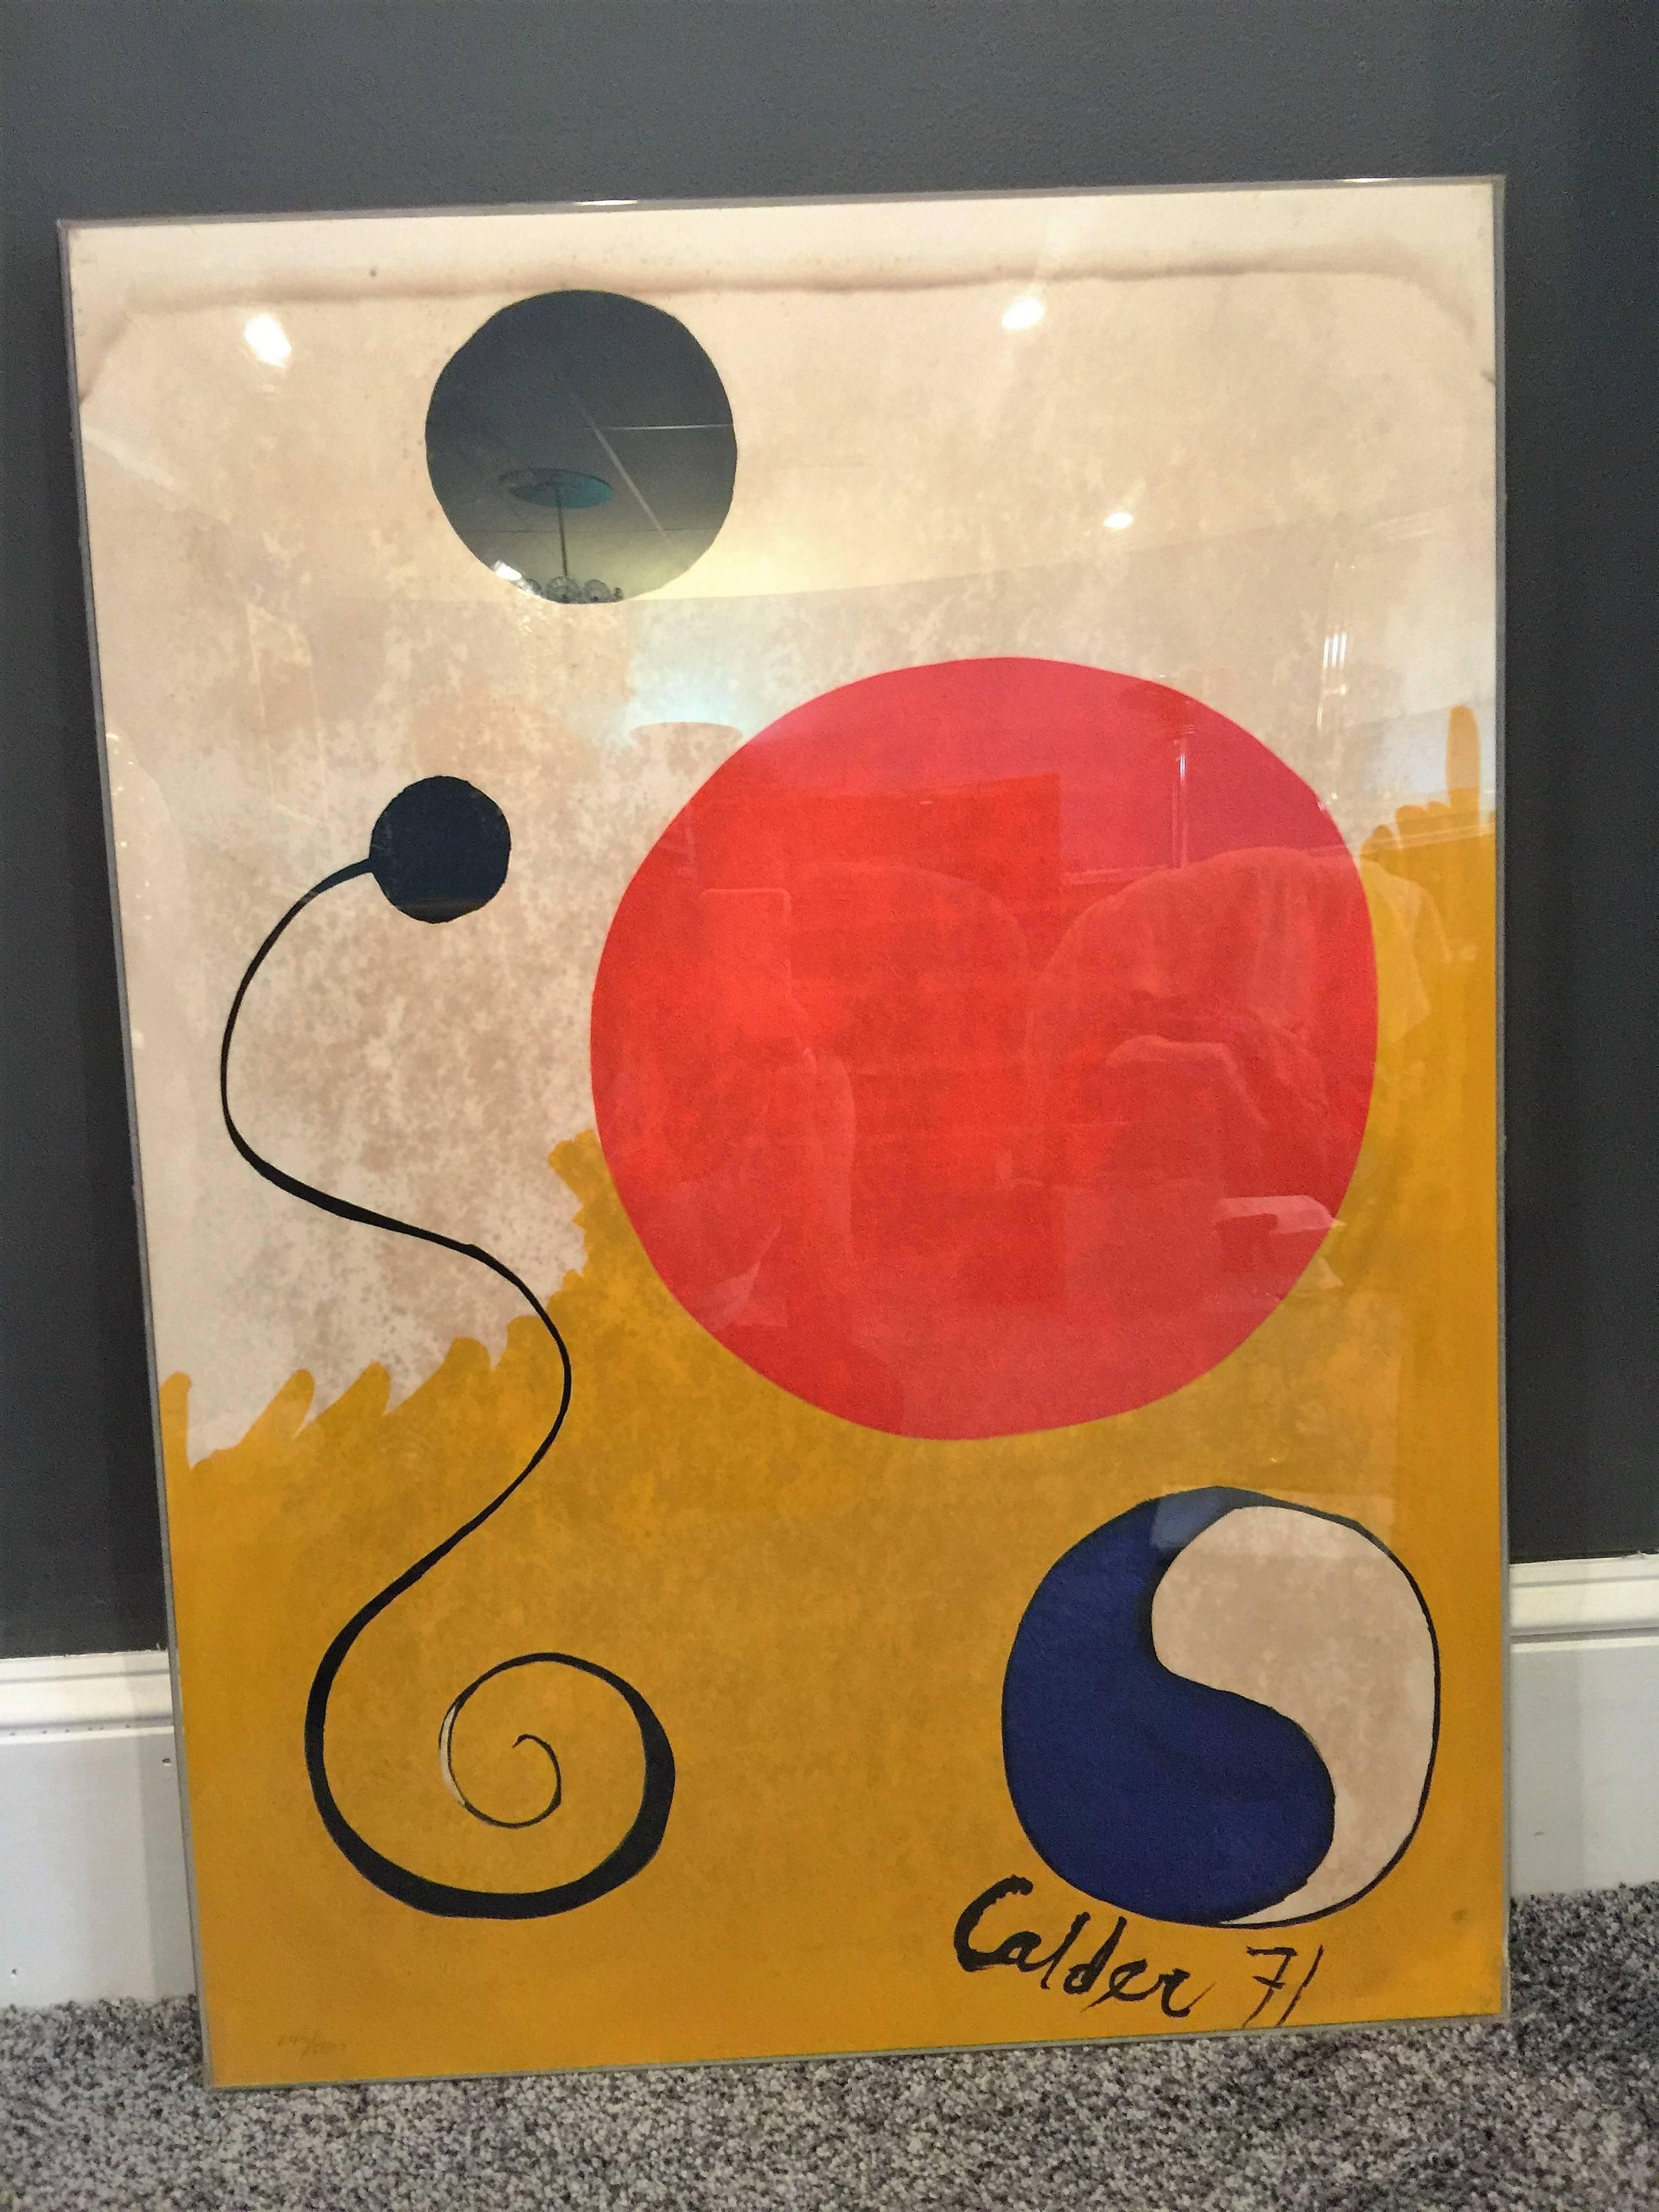 Yellow, blue, red and black on white Ying Yang modern lithograph by Calder Dated 71. Numbered 240/500 in pencil. Encased in a clear Lucite frame. The one problem is there is mold on the lithograph as shown in the photos.